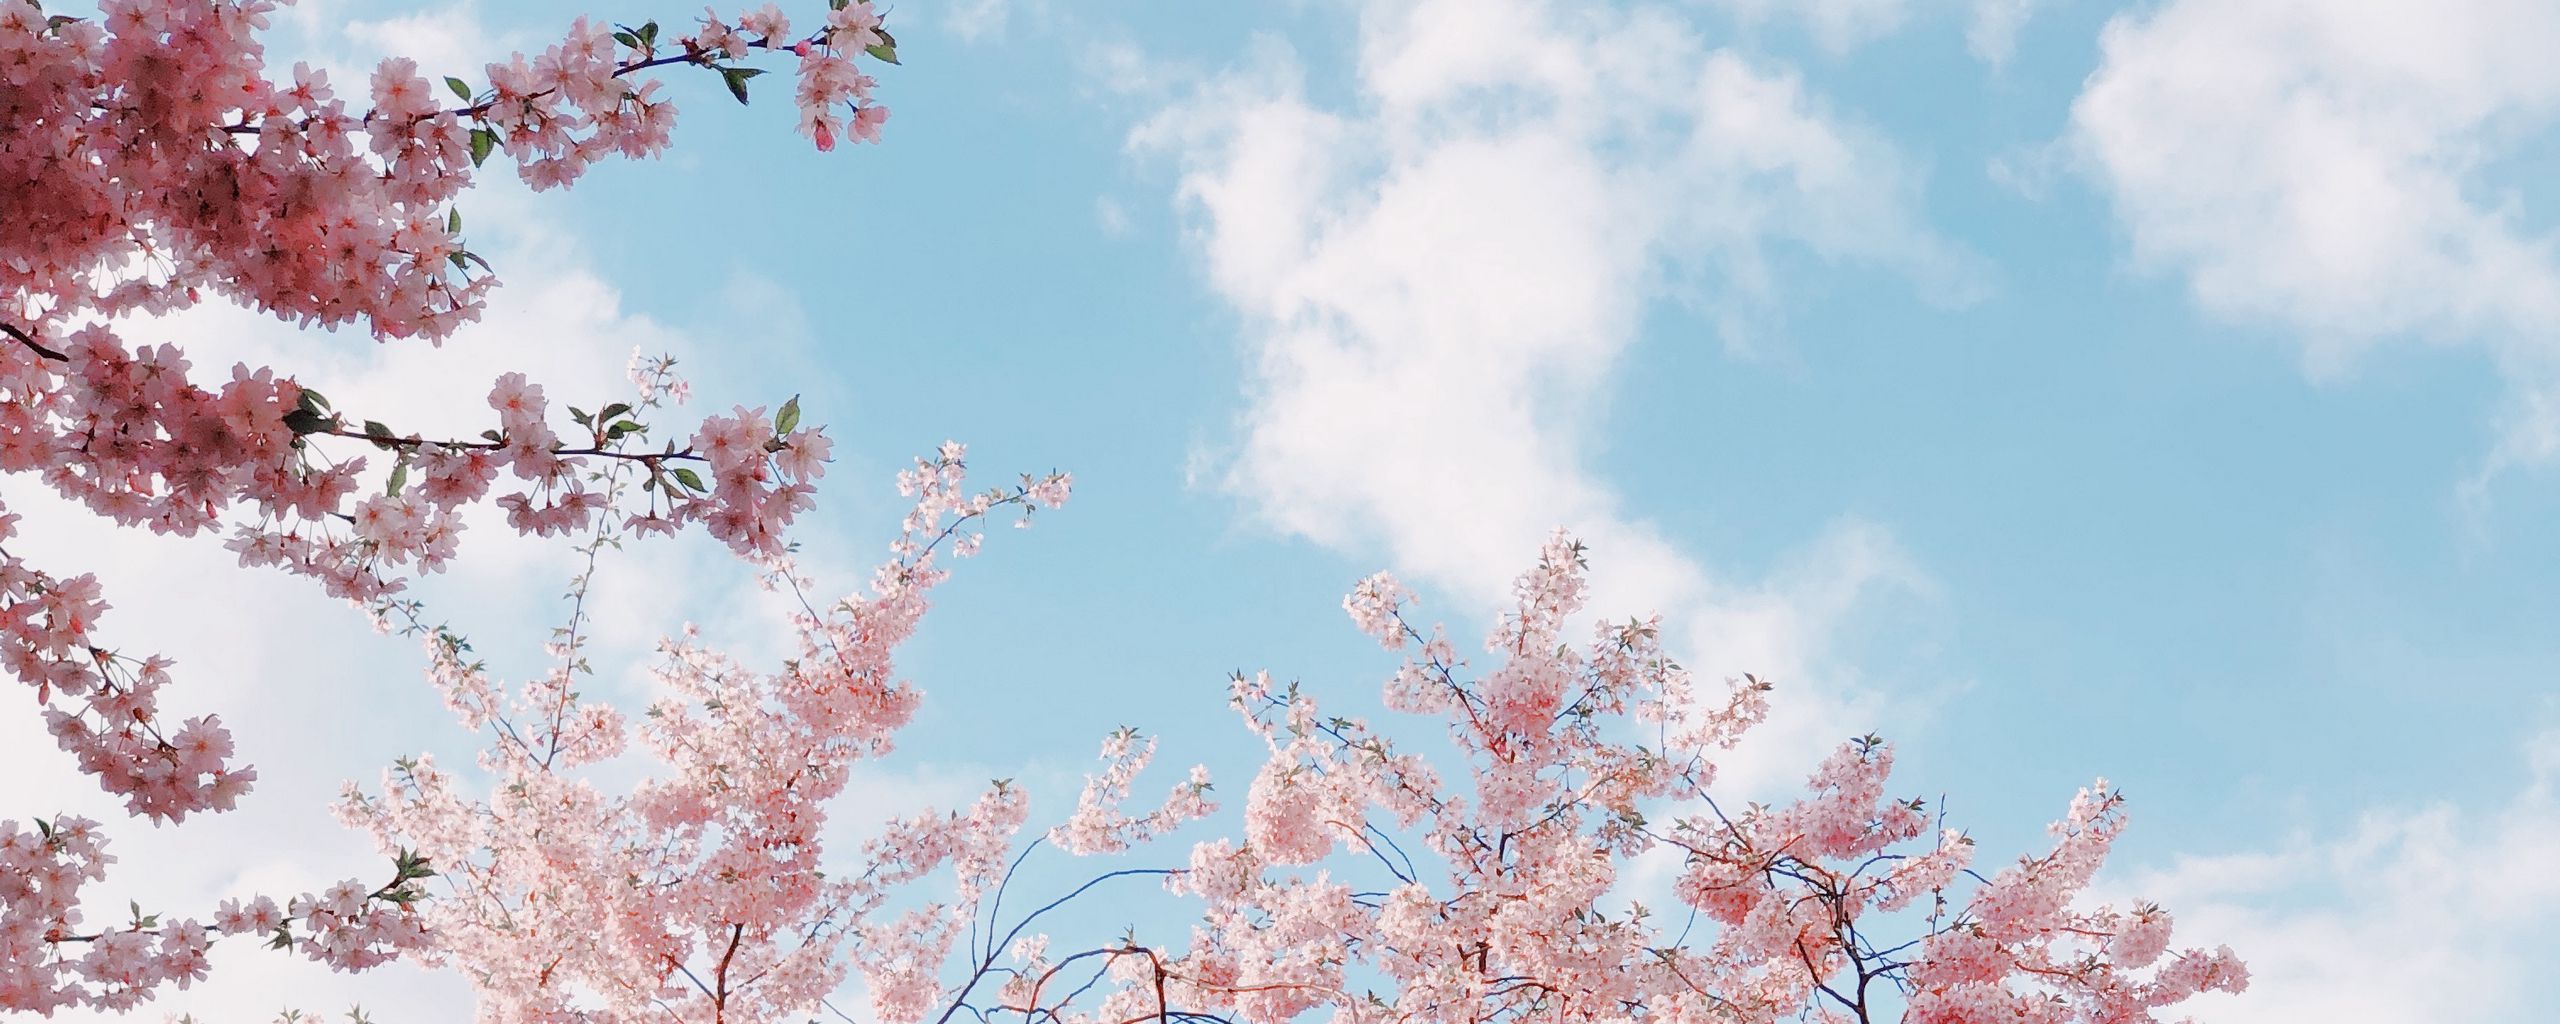 Download wallpaper 2560x1024 cherry, bloom, spring, flowers, branches, sky ultrawide monitor HD background